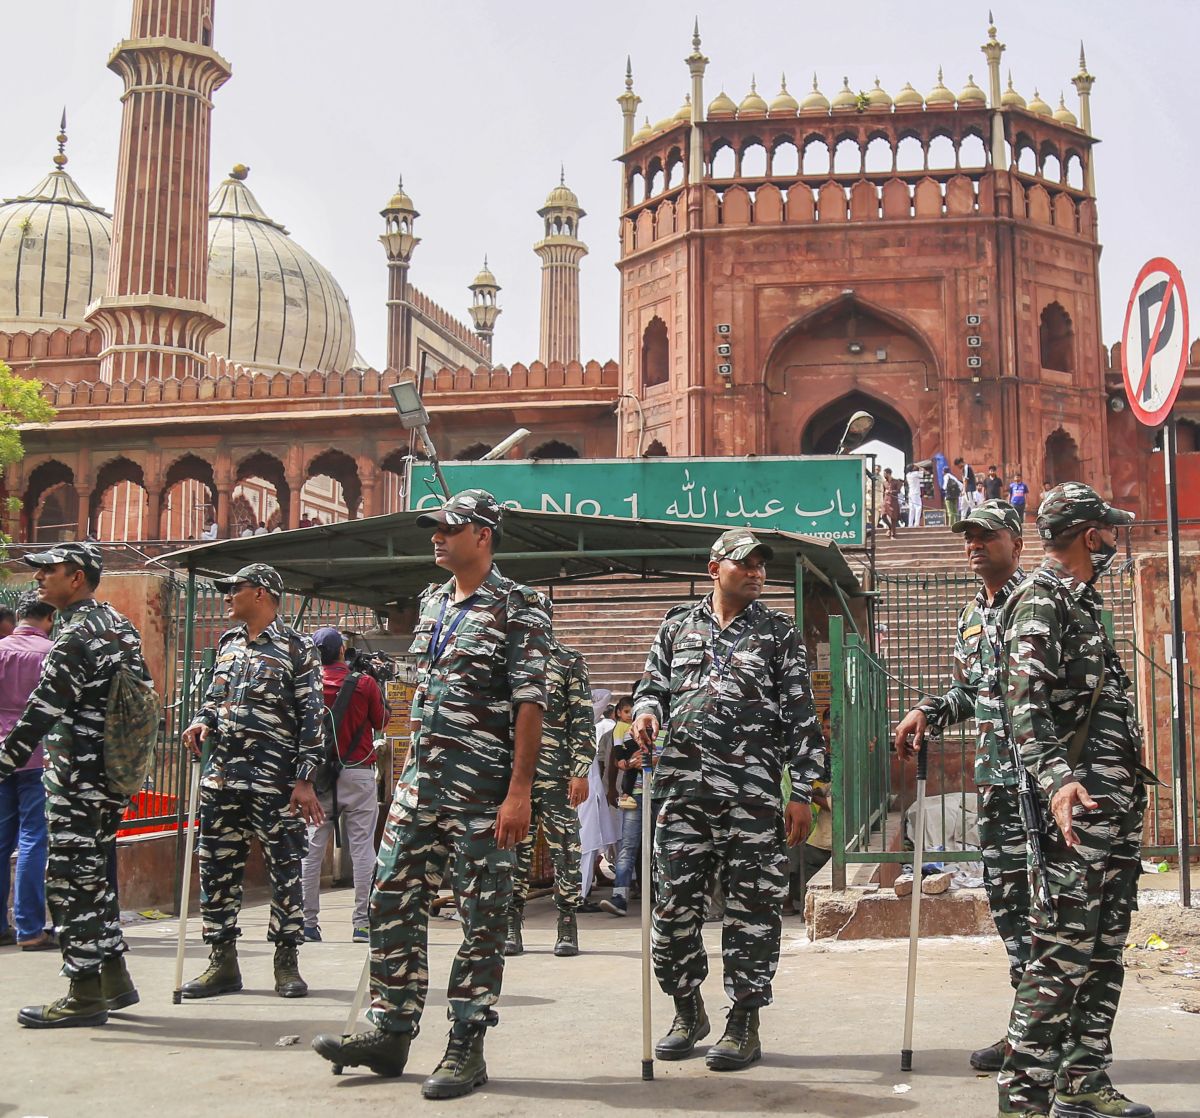 2 arrested for Friday protests outside Jama Masjid